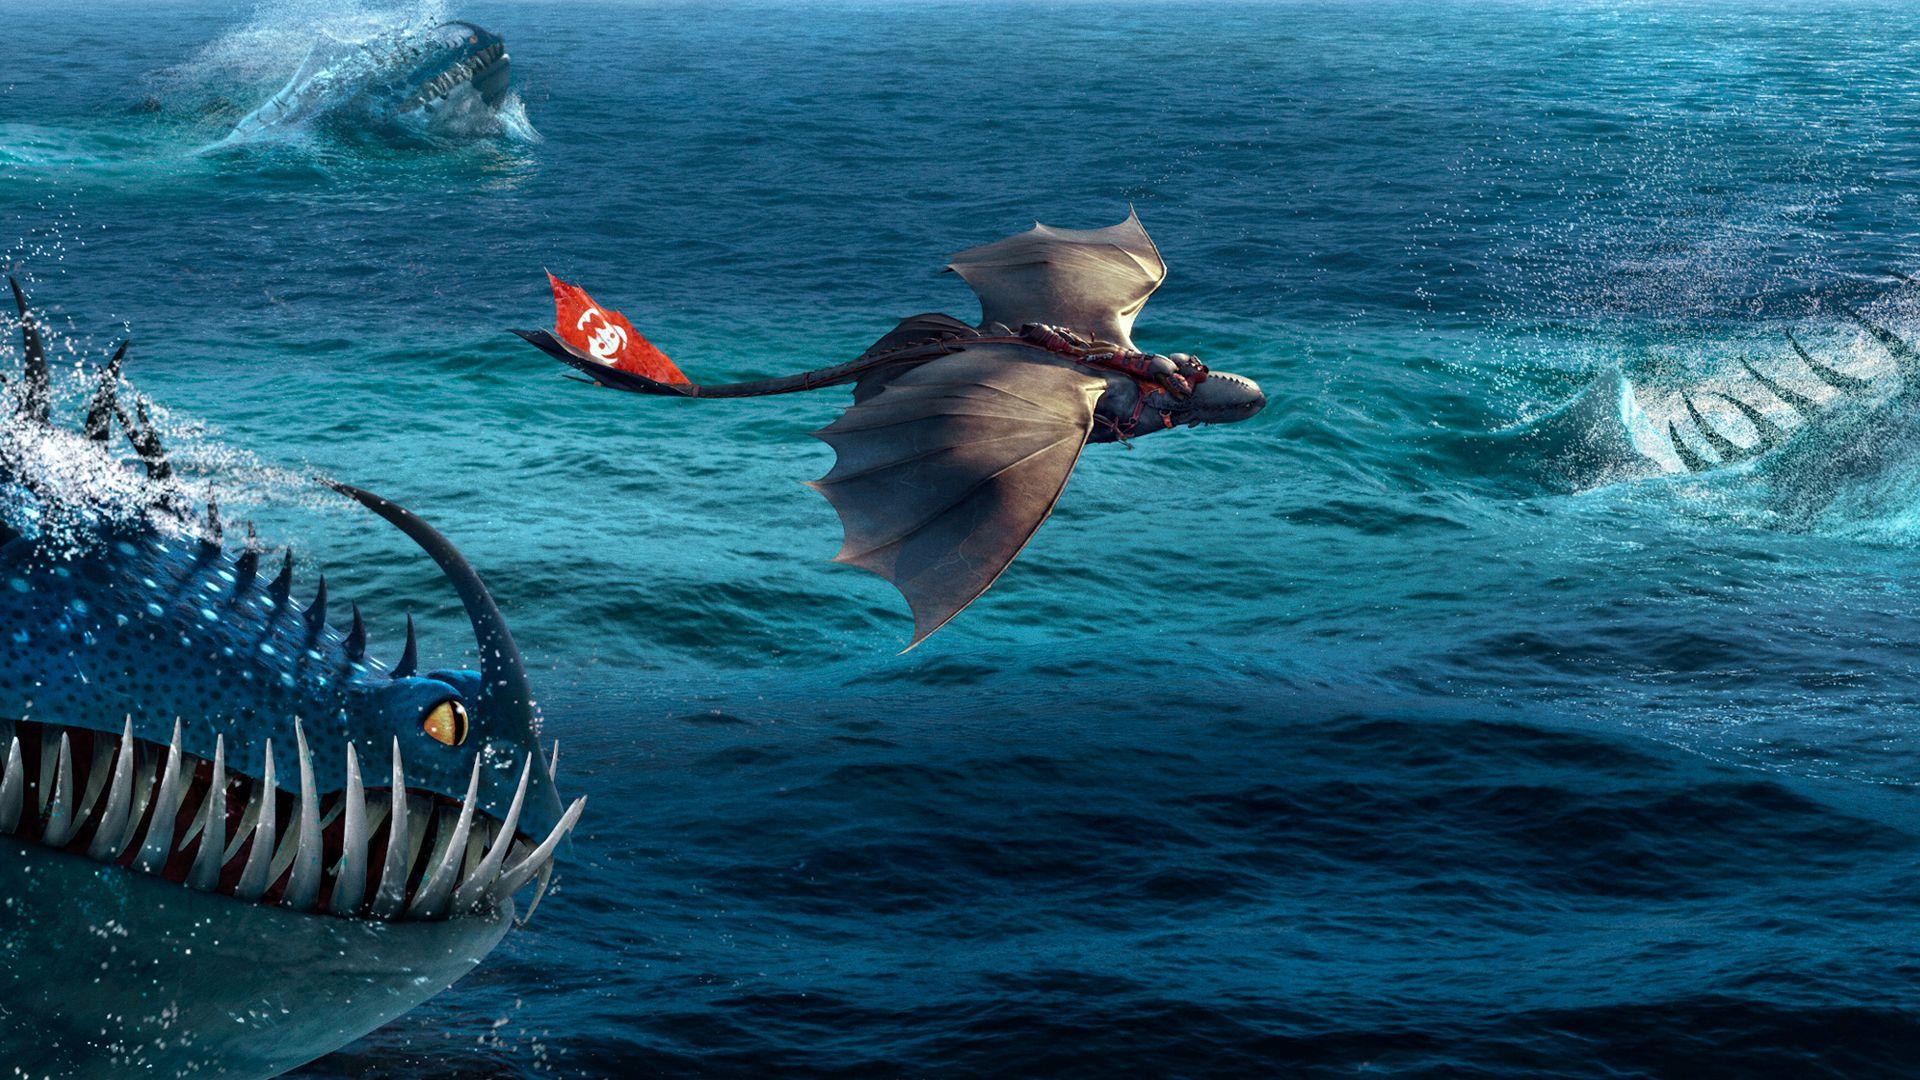 How to Train Your Dragon 2 Movie 0v Wallpaper HD